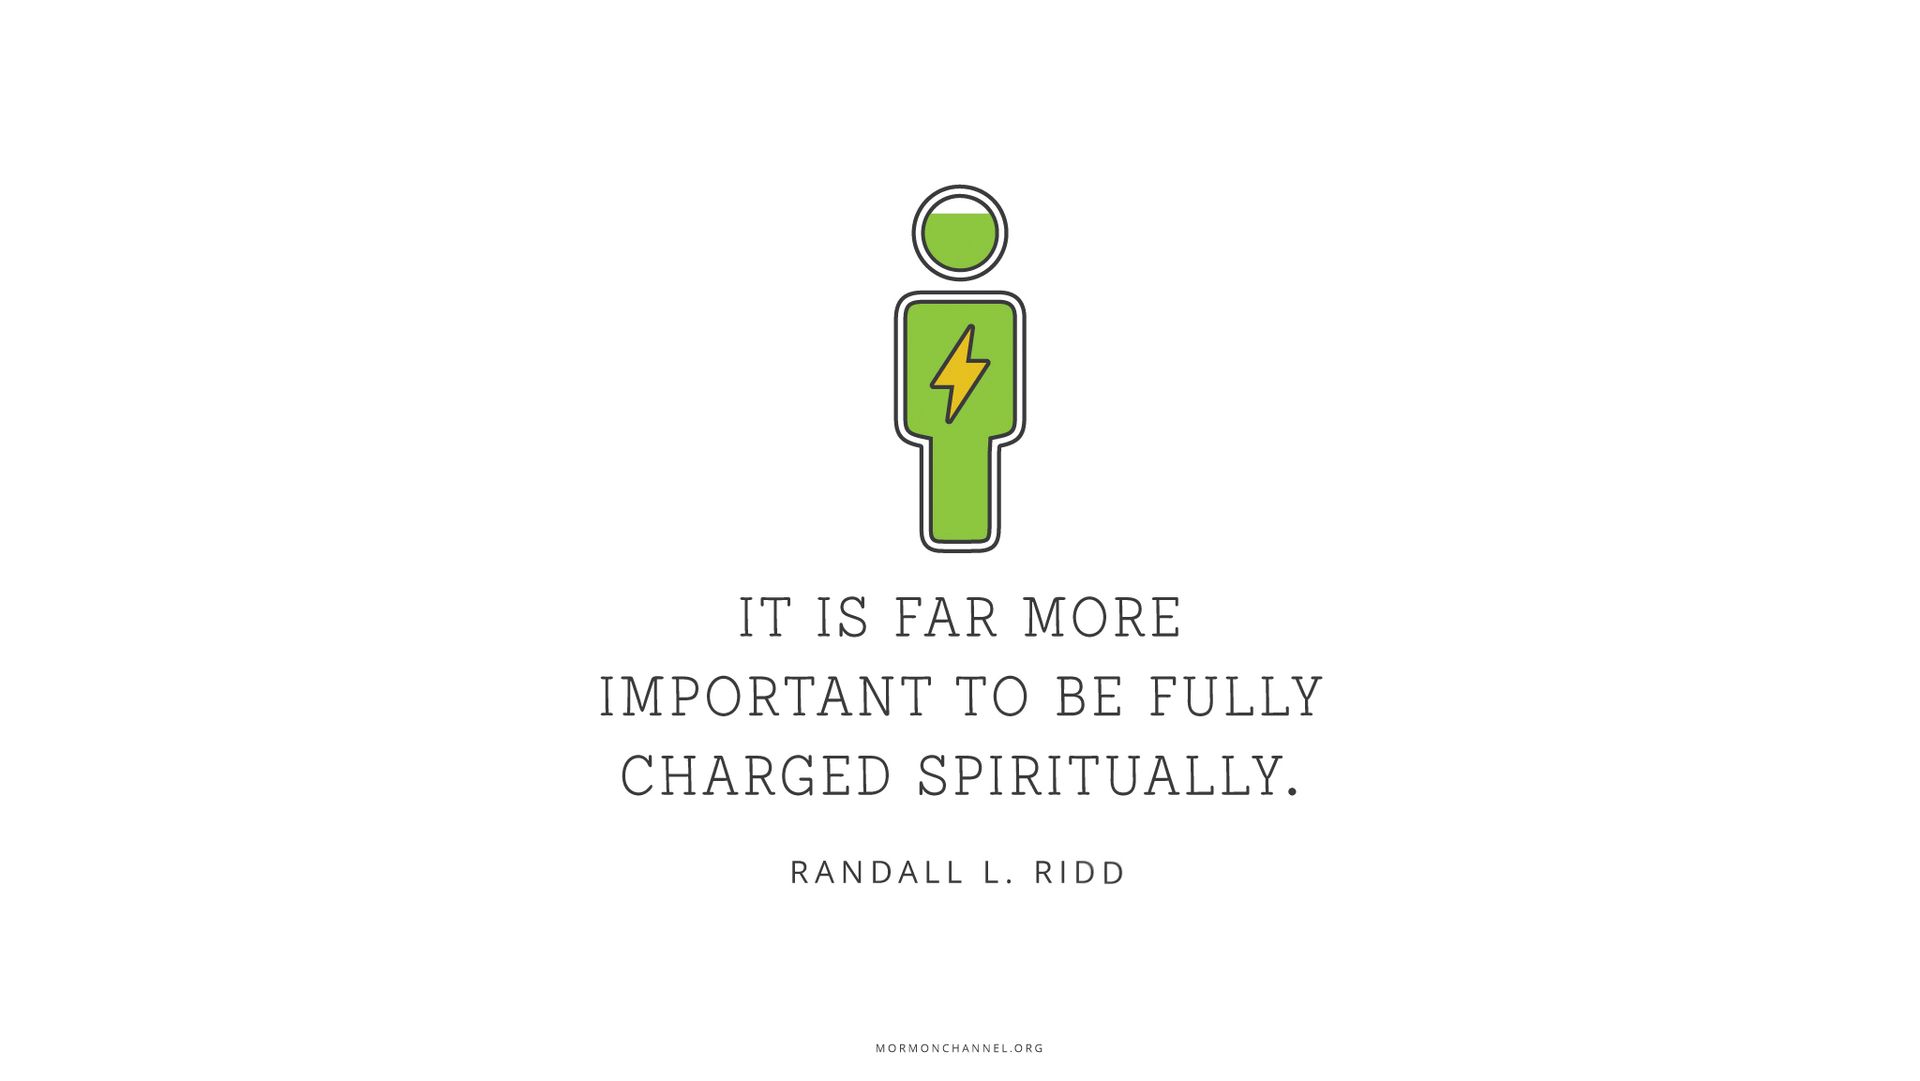 “It is far more important to be fully charged spiritually.”—Brother Randall L. Ridd, “The Choice Generation”